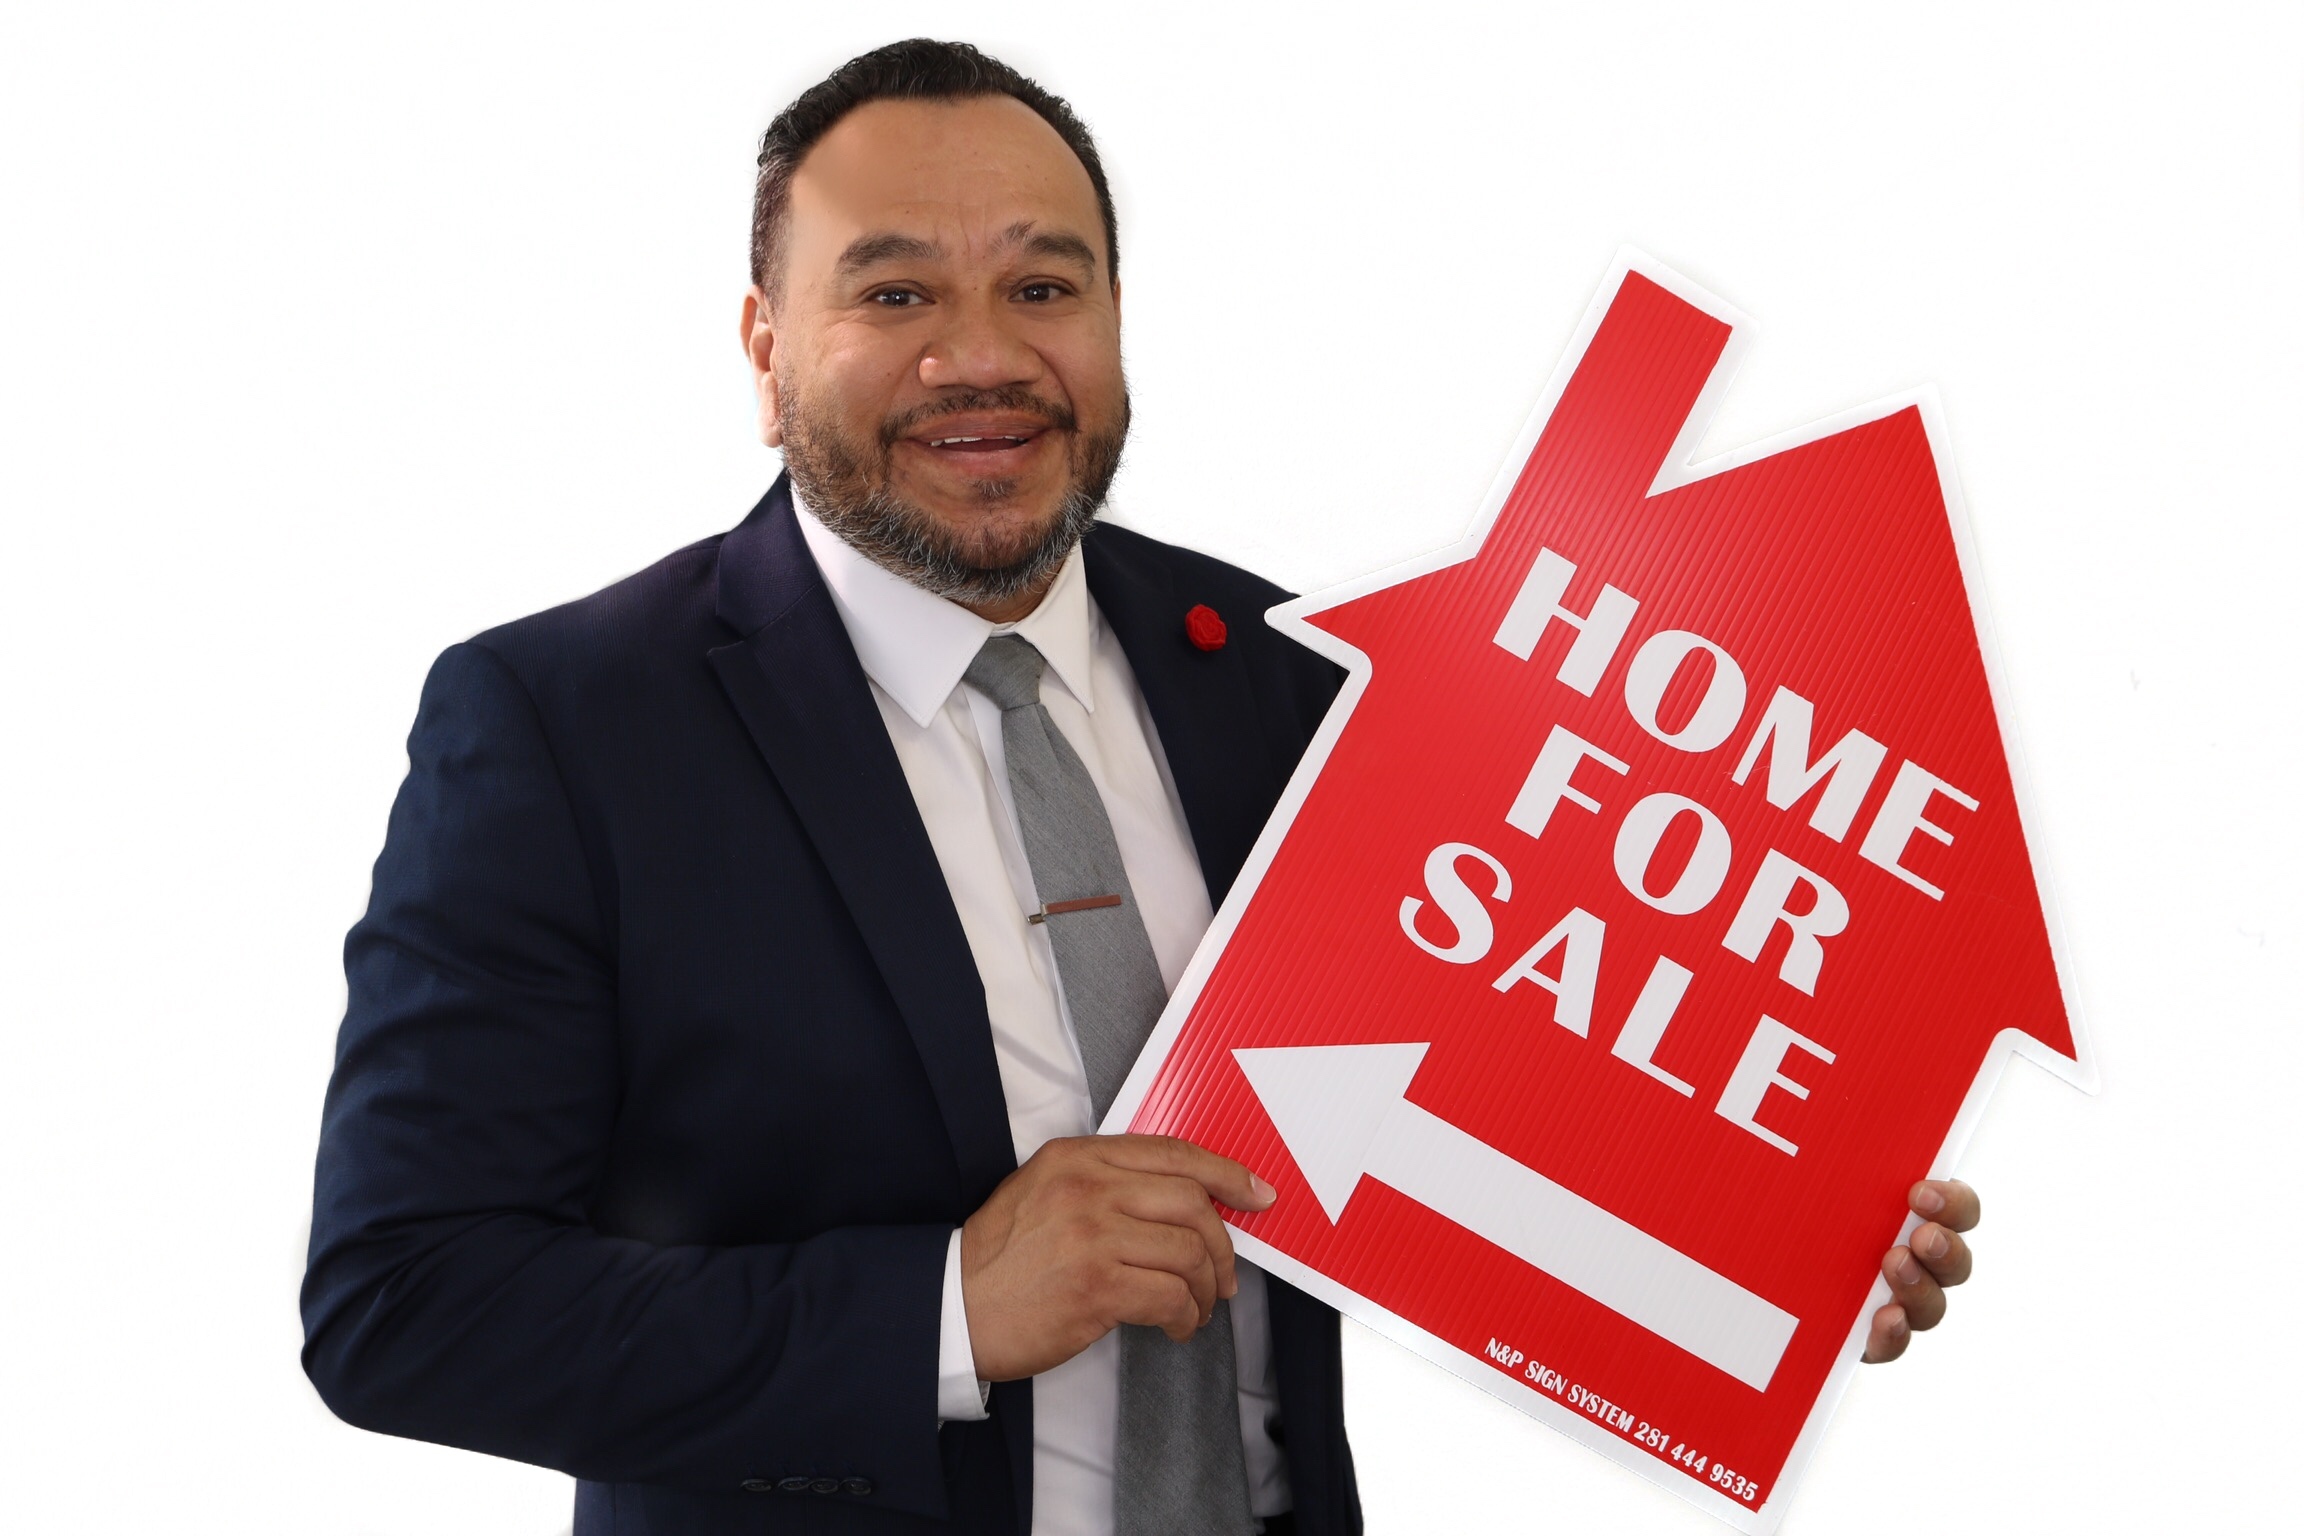 Jose Luis Soria, Texas Real Estate Agent in Houston, Lions Gate Realty